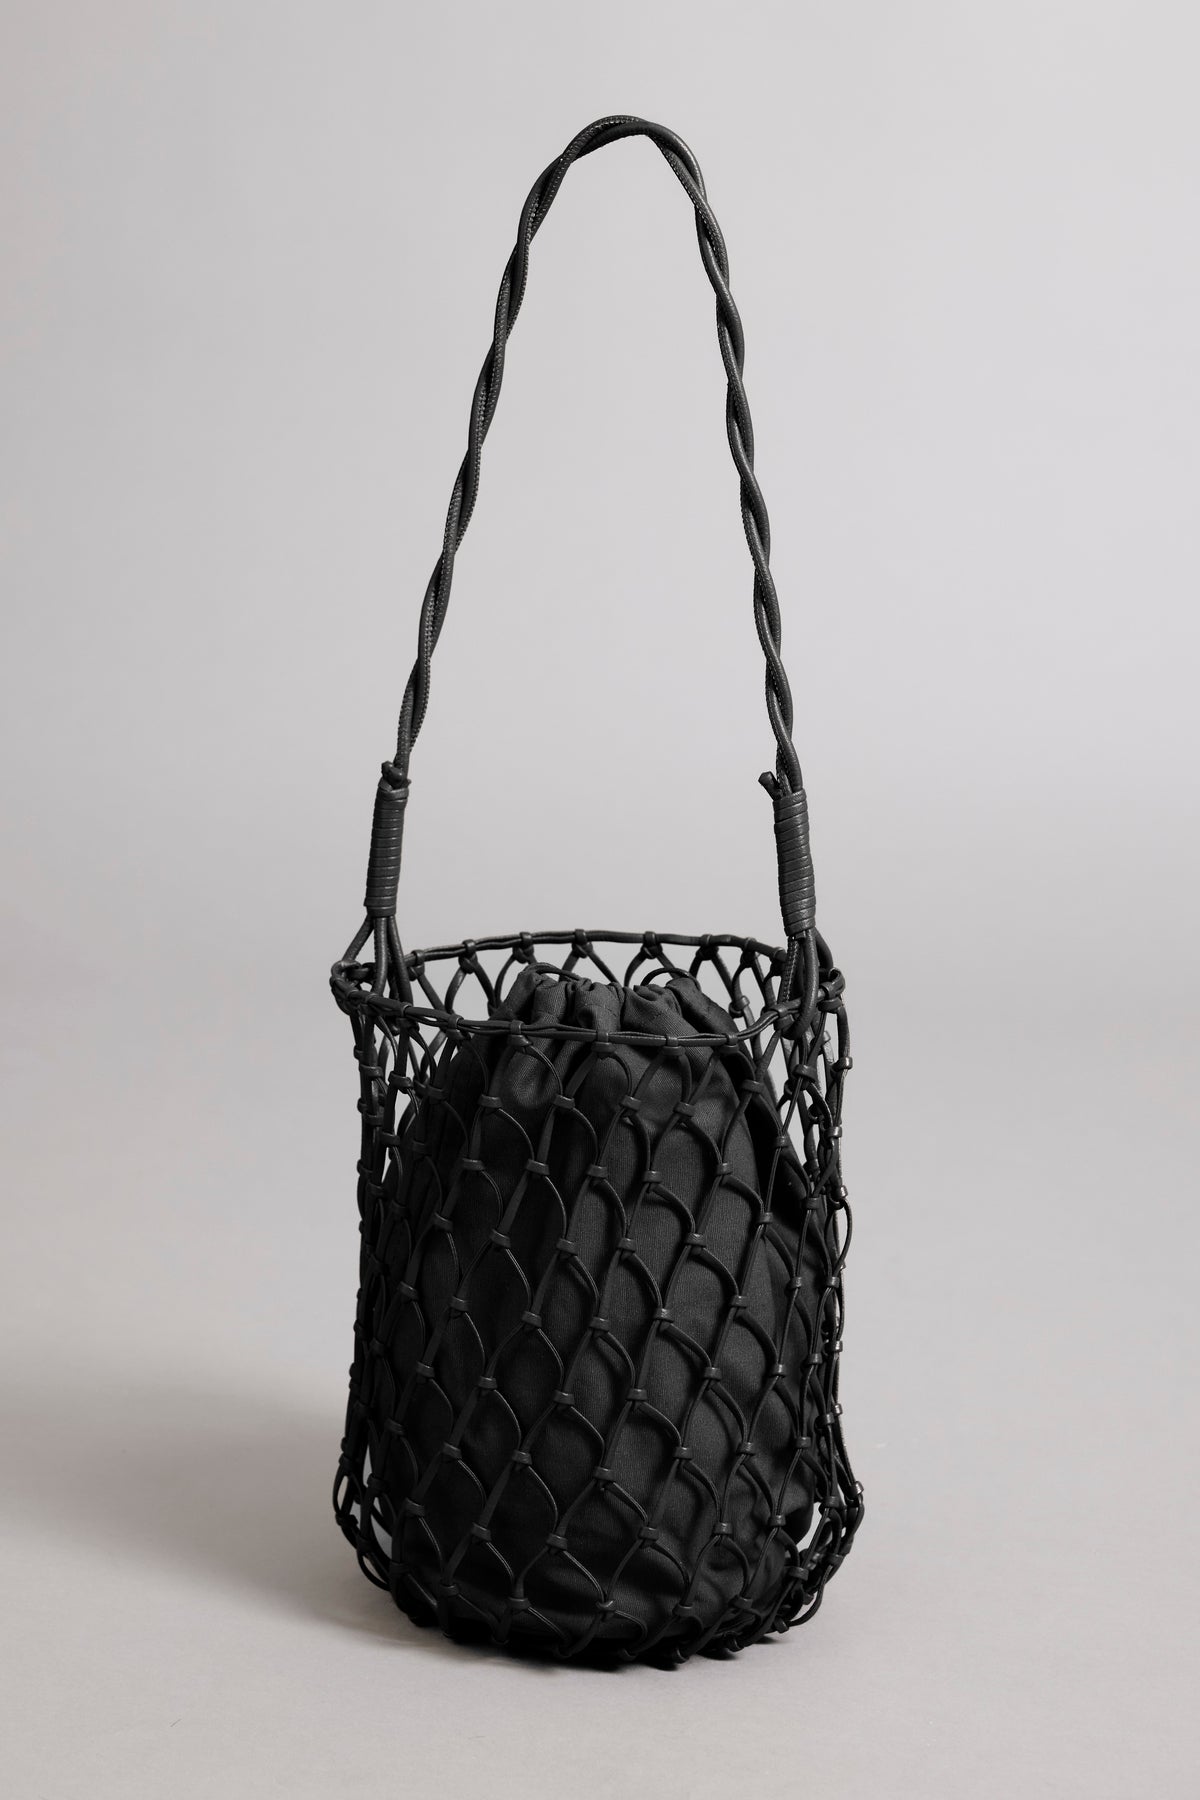   A black Velvet by Graham & Spencer mesh tote bag with a braided vegan leather strap and cinched top, standing against a plain light background. 